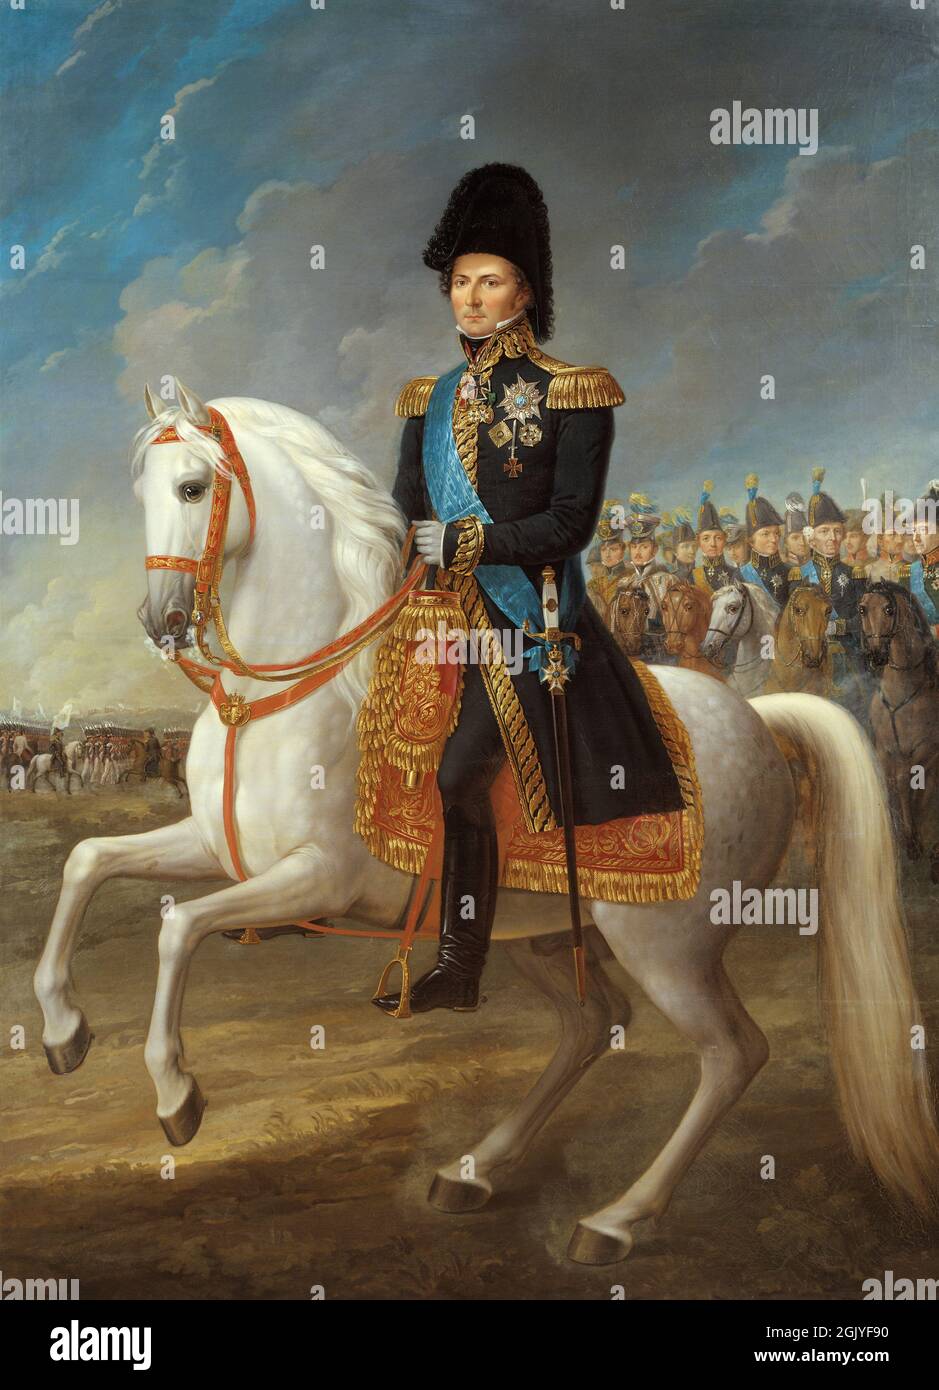 Marshal Jean Baptiste Bernadotte who became  Crown Prince of Sweden. Napoleon's trusted Maréchals. Napoleon only promoted his men by merit, not by their title, which gave him a formidable army during the Napoleonic Wars.  painting by Fredric Westin. Bernadotte was the son of a prosecutor. Stock Photo